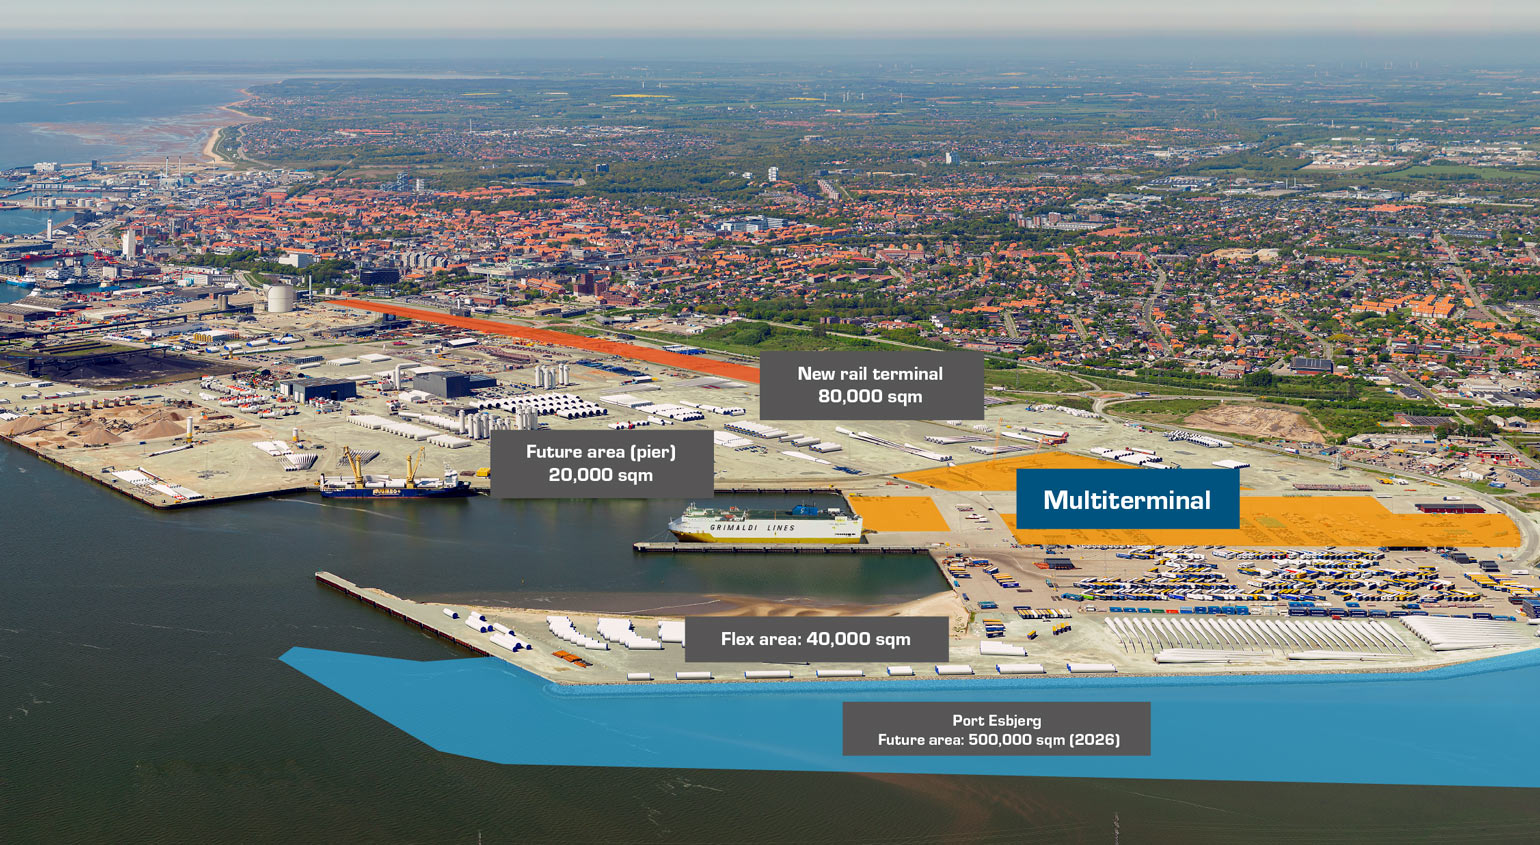 Aerial view of the expansive Multiterminal spanning 150,000 sqm, featuring a sea terminal with vessels up to 225m x 36m x 12.5m, rail connectivity within the port area, and direct road access to the motorway. The multiterminal boasts storage facilities, 24/7 stevedoring services, and a well-equipped container terminal. Offering dedicated port agency services, customs clearance, and a comprehensive range of logistics solutions for various cargo types, including Breakbulk, RoRo, Auto Hub, Containers, and more. Multiterminal serves as your maritime gateway to the world, ensuring excellence, convenience, and efficiency in cargo handling and transportation.